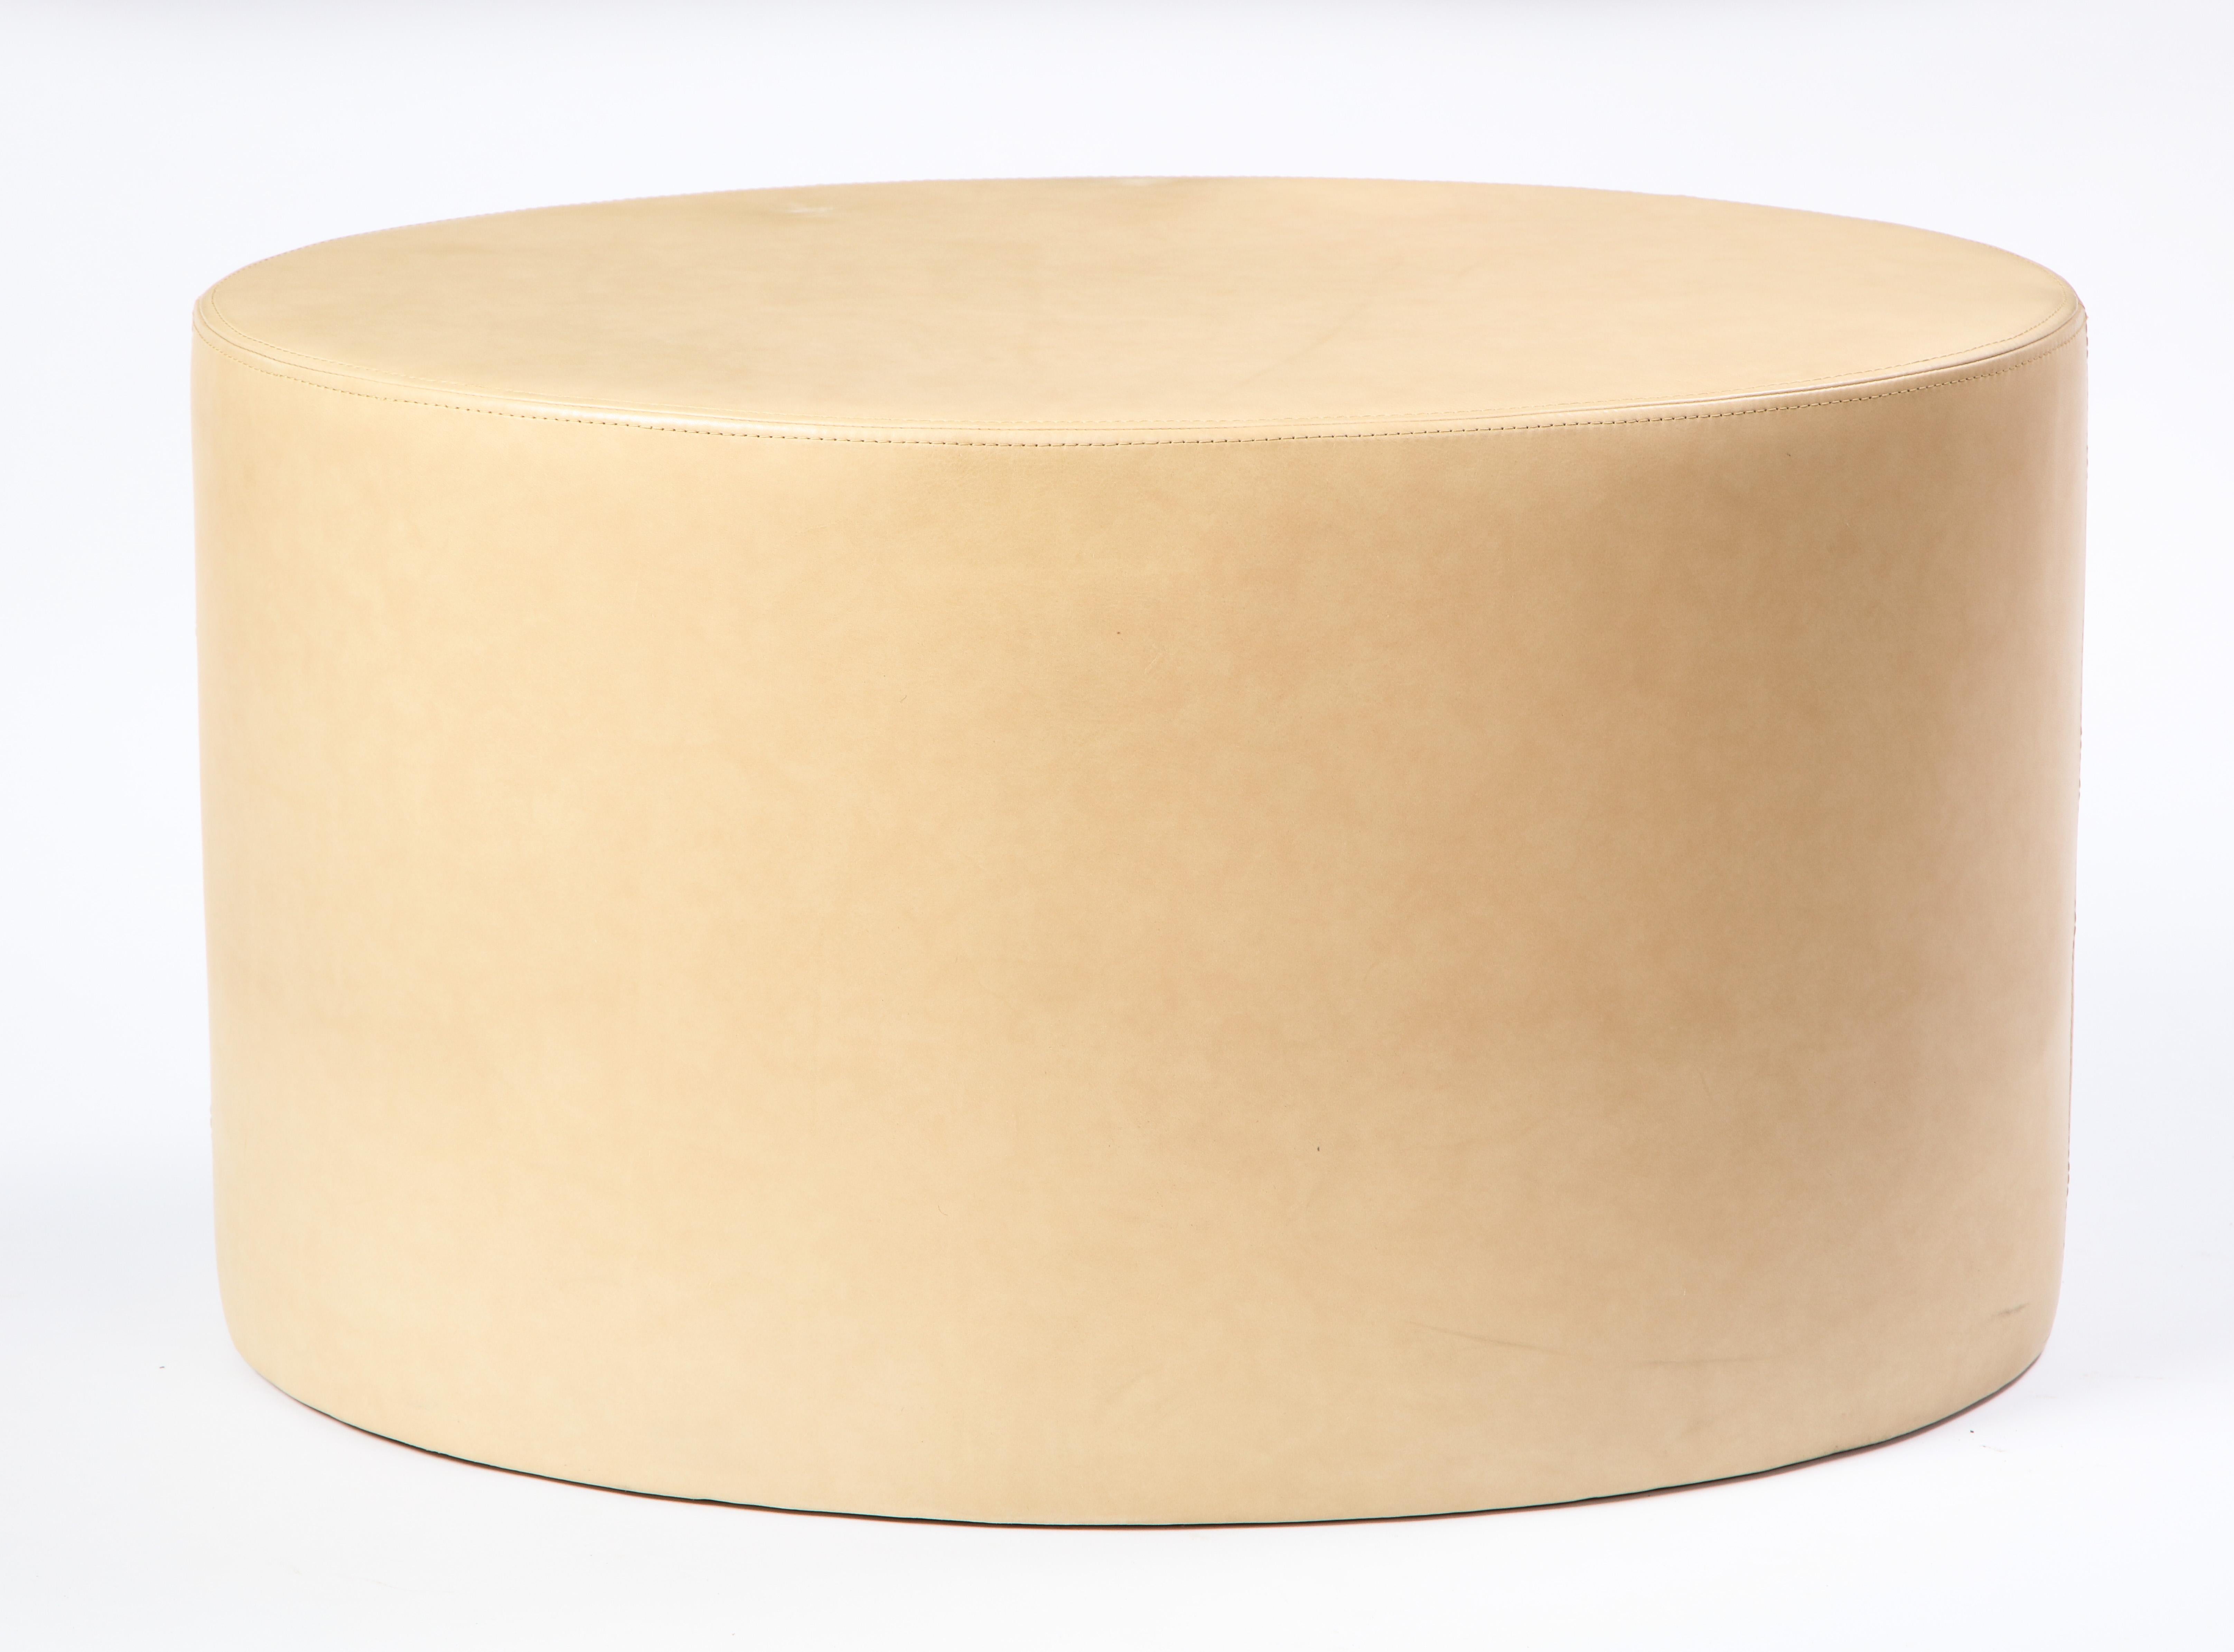 Modern cream-colored leather low table or ottoman. Oval in shape, this topstitched leather-covered low table adds a warm touch to any modern seating arrangement and is perfect as a side or coffee table for any living room or lounge area.

Property